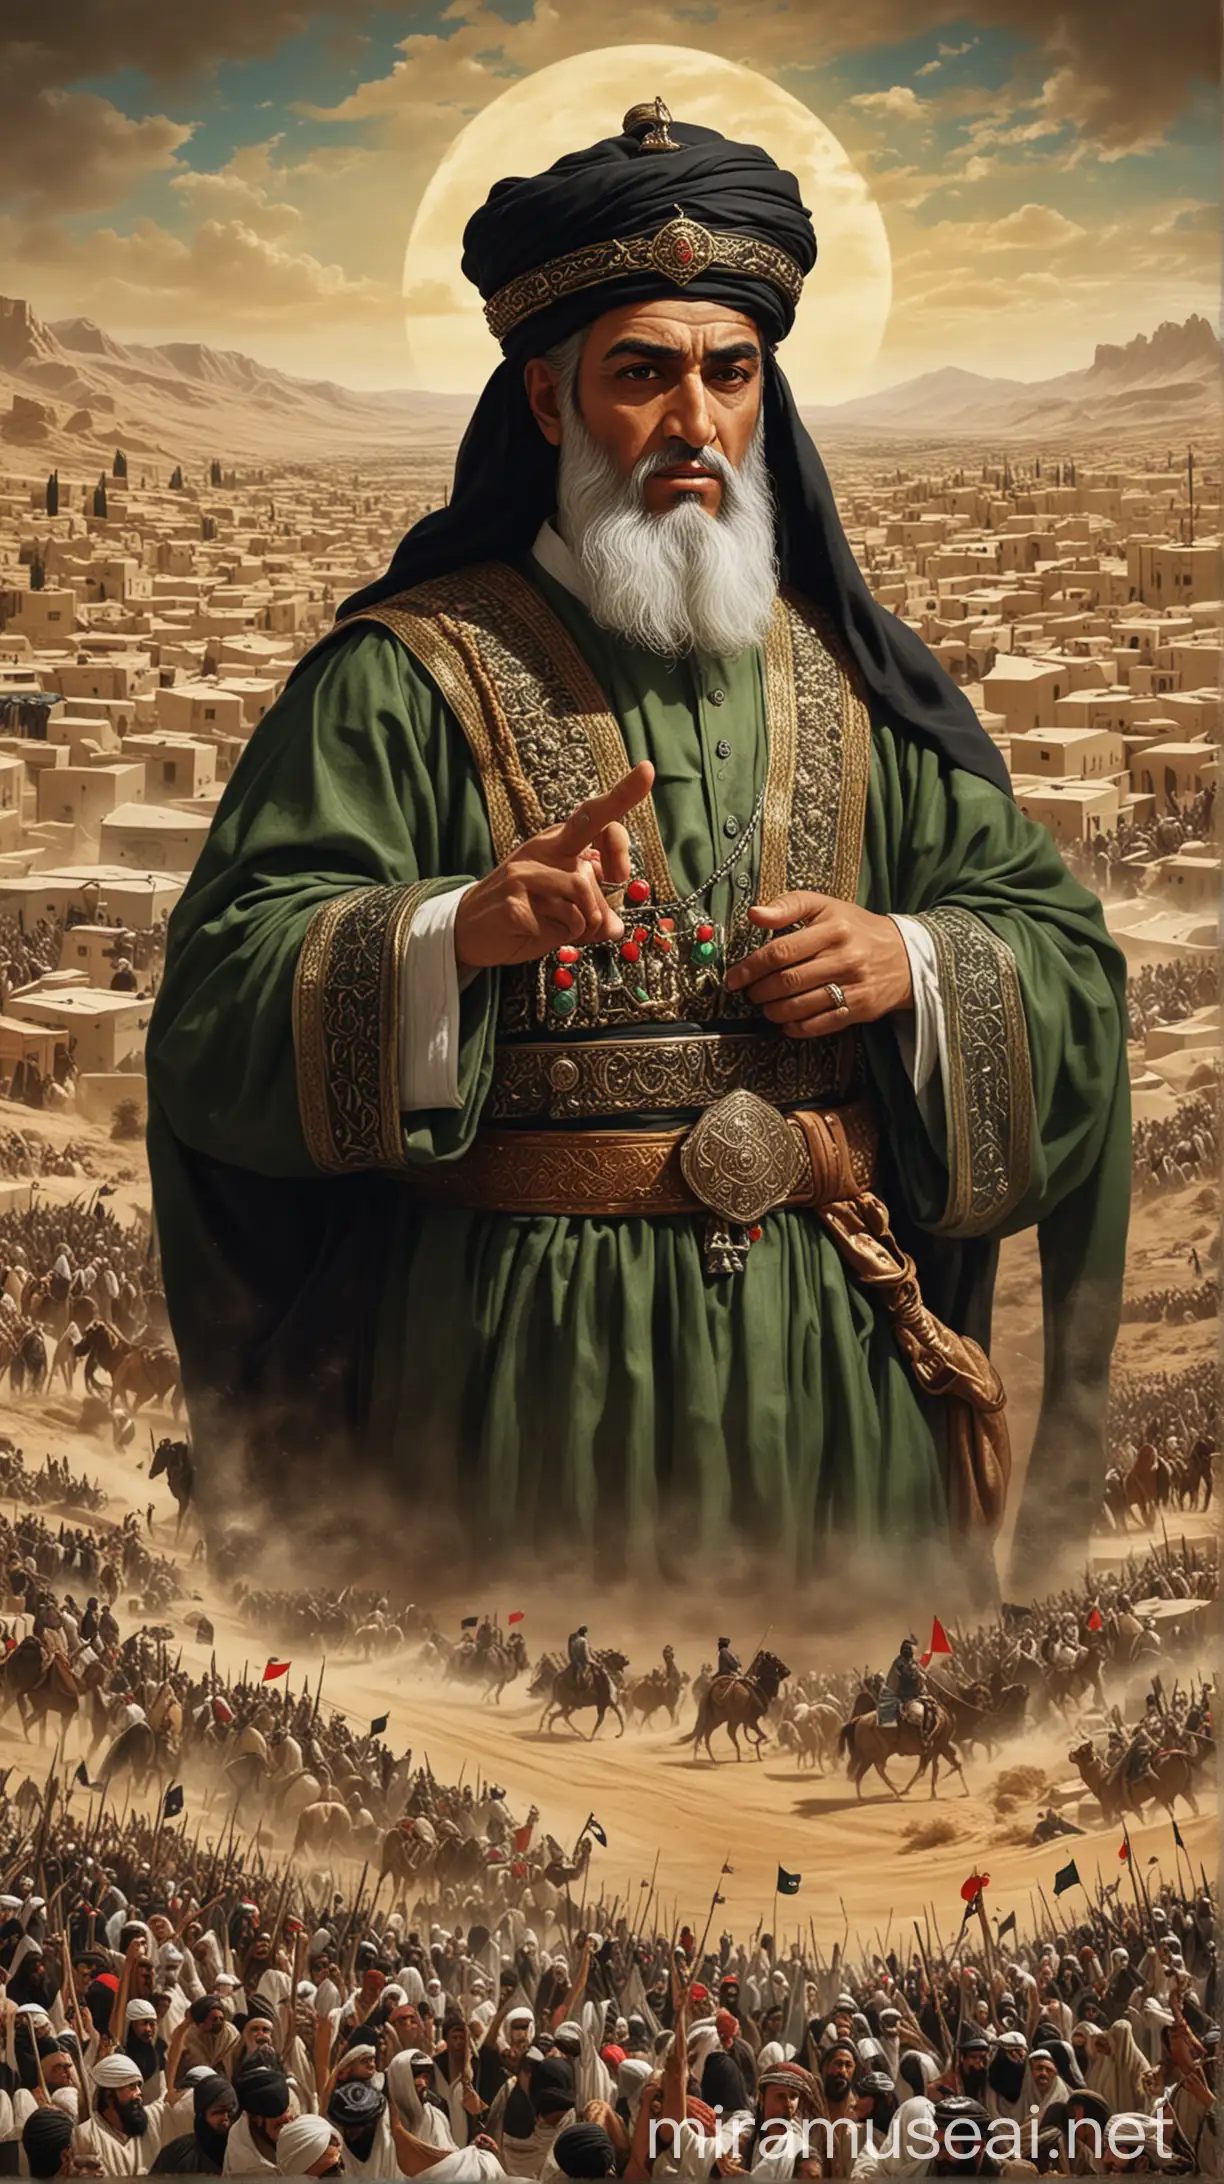 A visual representation of ʿUmar I's tenure as caliph, titled "commander of the faithful," overseeing the expansion of Arab territories and the consolidation of the Islamic state.

